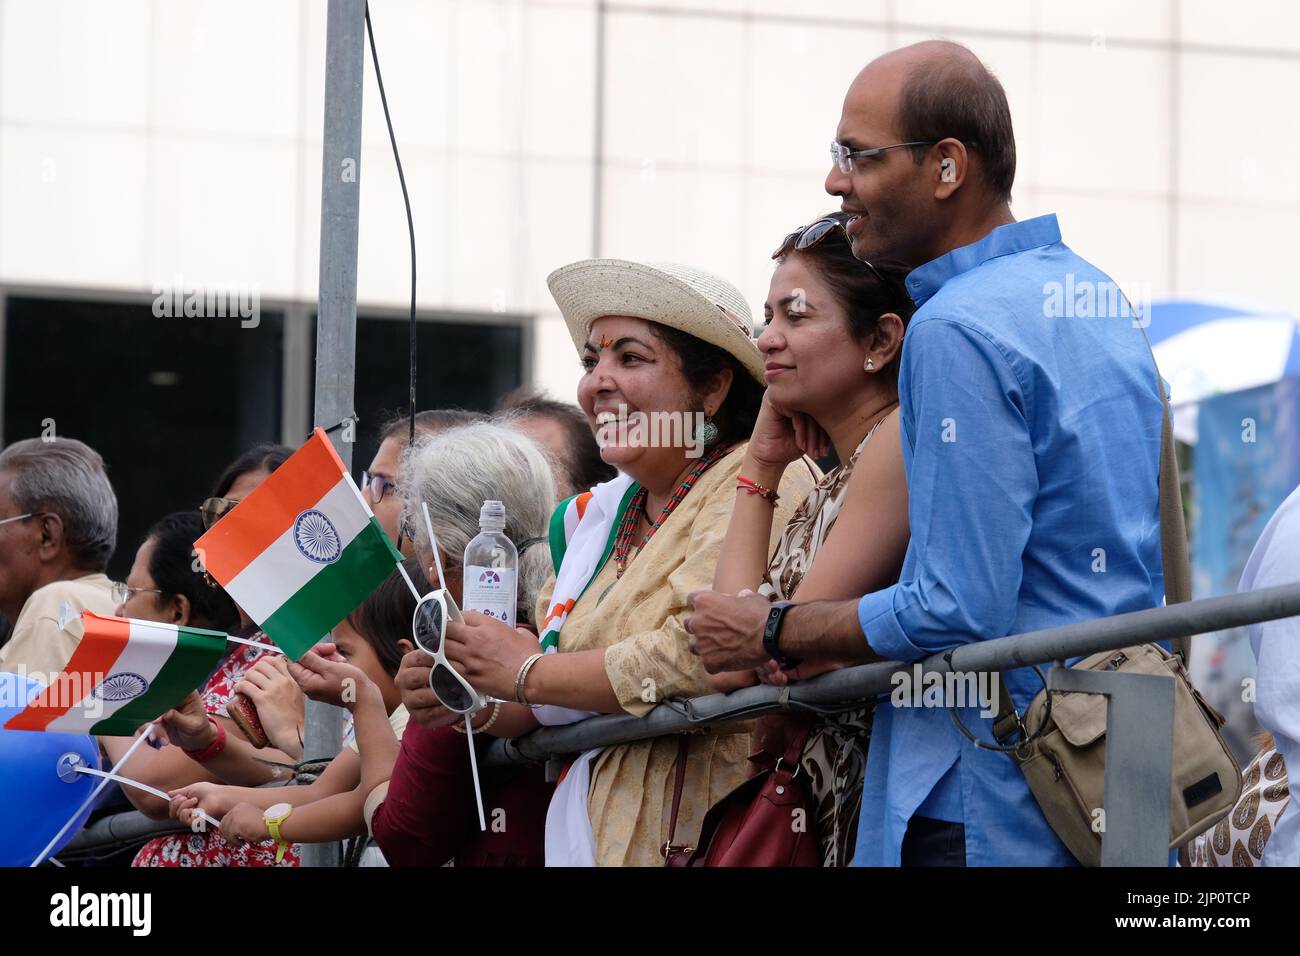 London, UK, 14th August, 2022. The Indian diaspora in London enthusiastically welcomed the arrival of Indian Navy Sail Training Ship, 'Tarangini' ahead of India's 75th Independence Day, which falls on the 15th August. The ship berthed in Canary Wharf, is one of seven Indian vessels that sailed to different cities worldwide to mark the occasion.  Credit: Eleventh Hour Photography/Alamy Live News Stock Photo